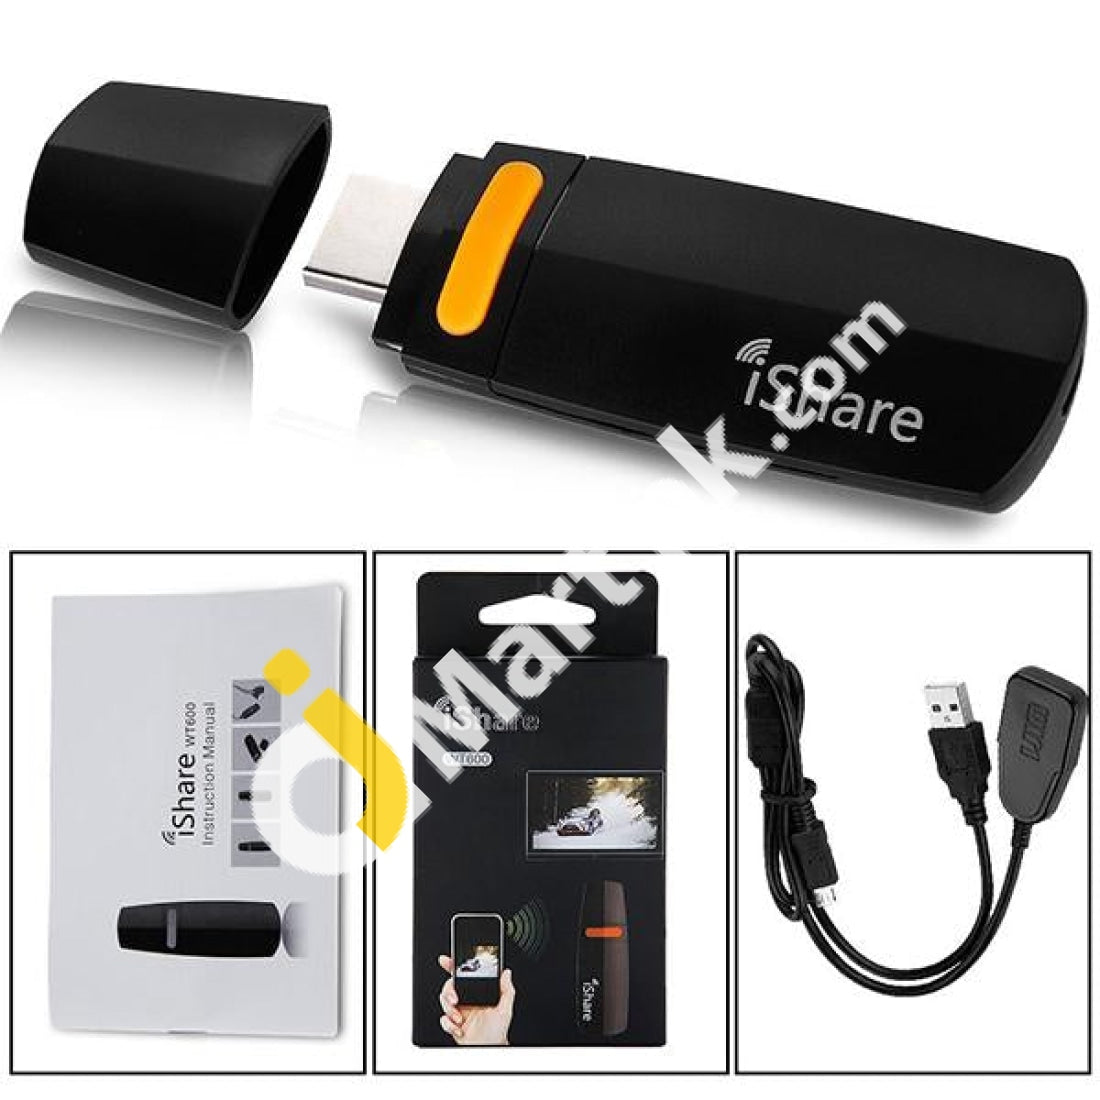 Ishare Wt600 Wifi Hdmi Streaming Media Player Share Miracast Dlna Ezcast Imported From Uk